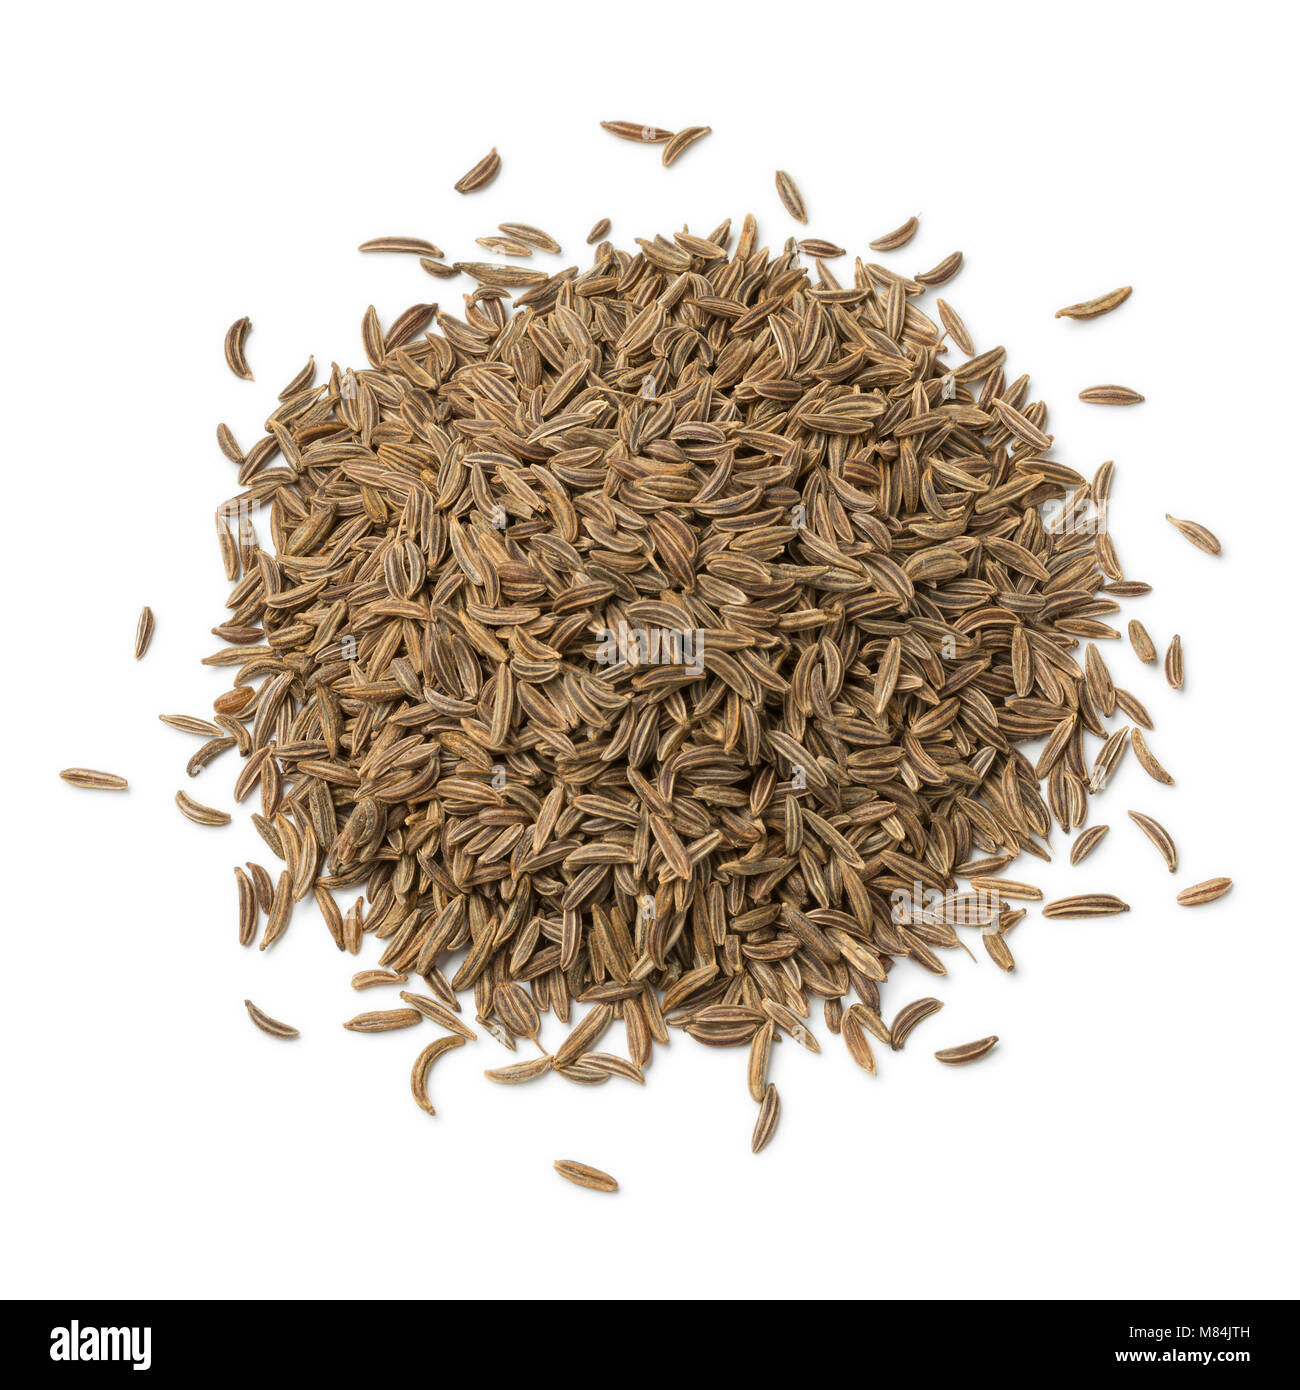 Heap of Caraway seeds isolated on white background Stock Photo